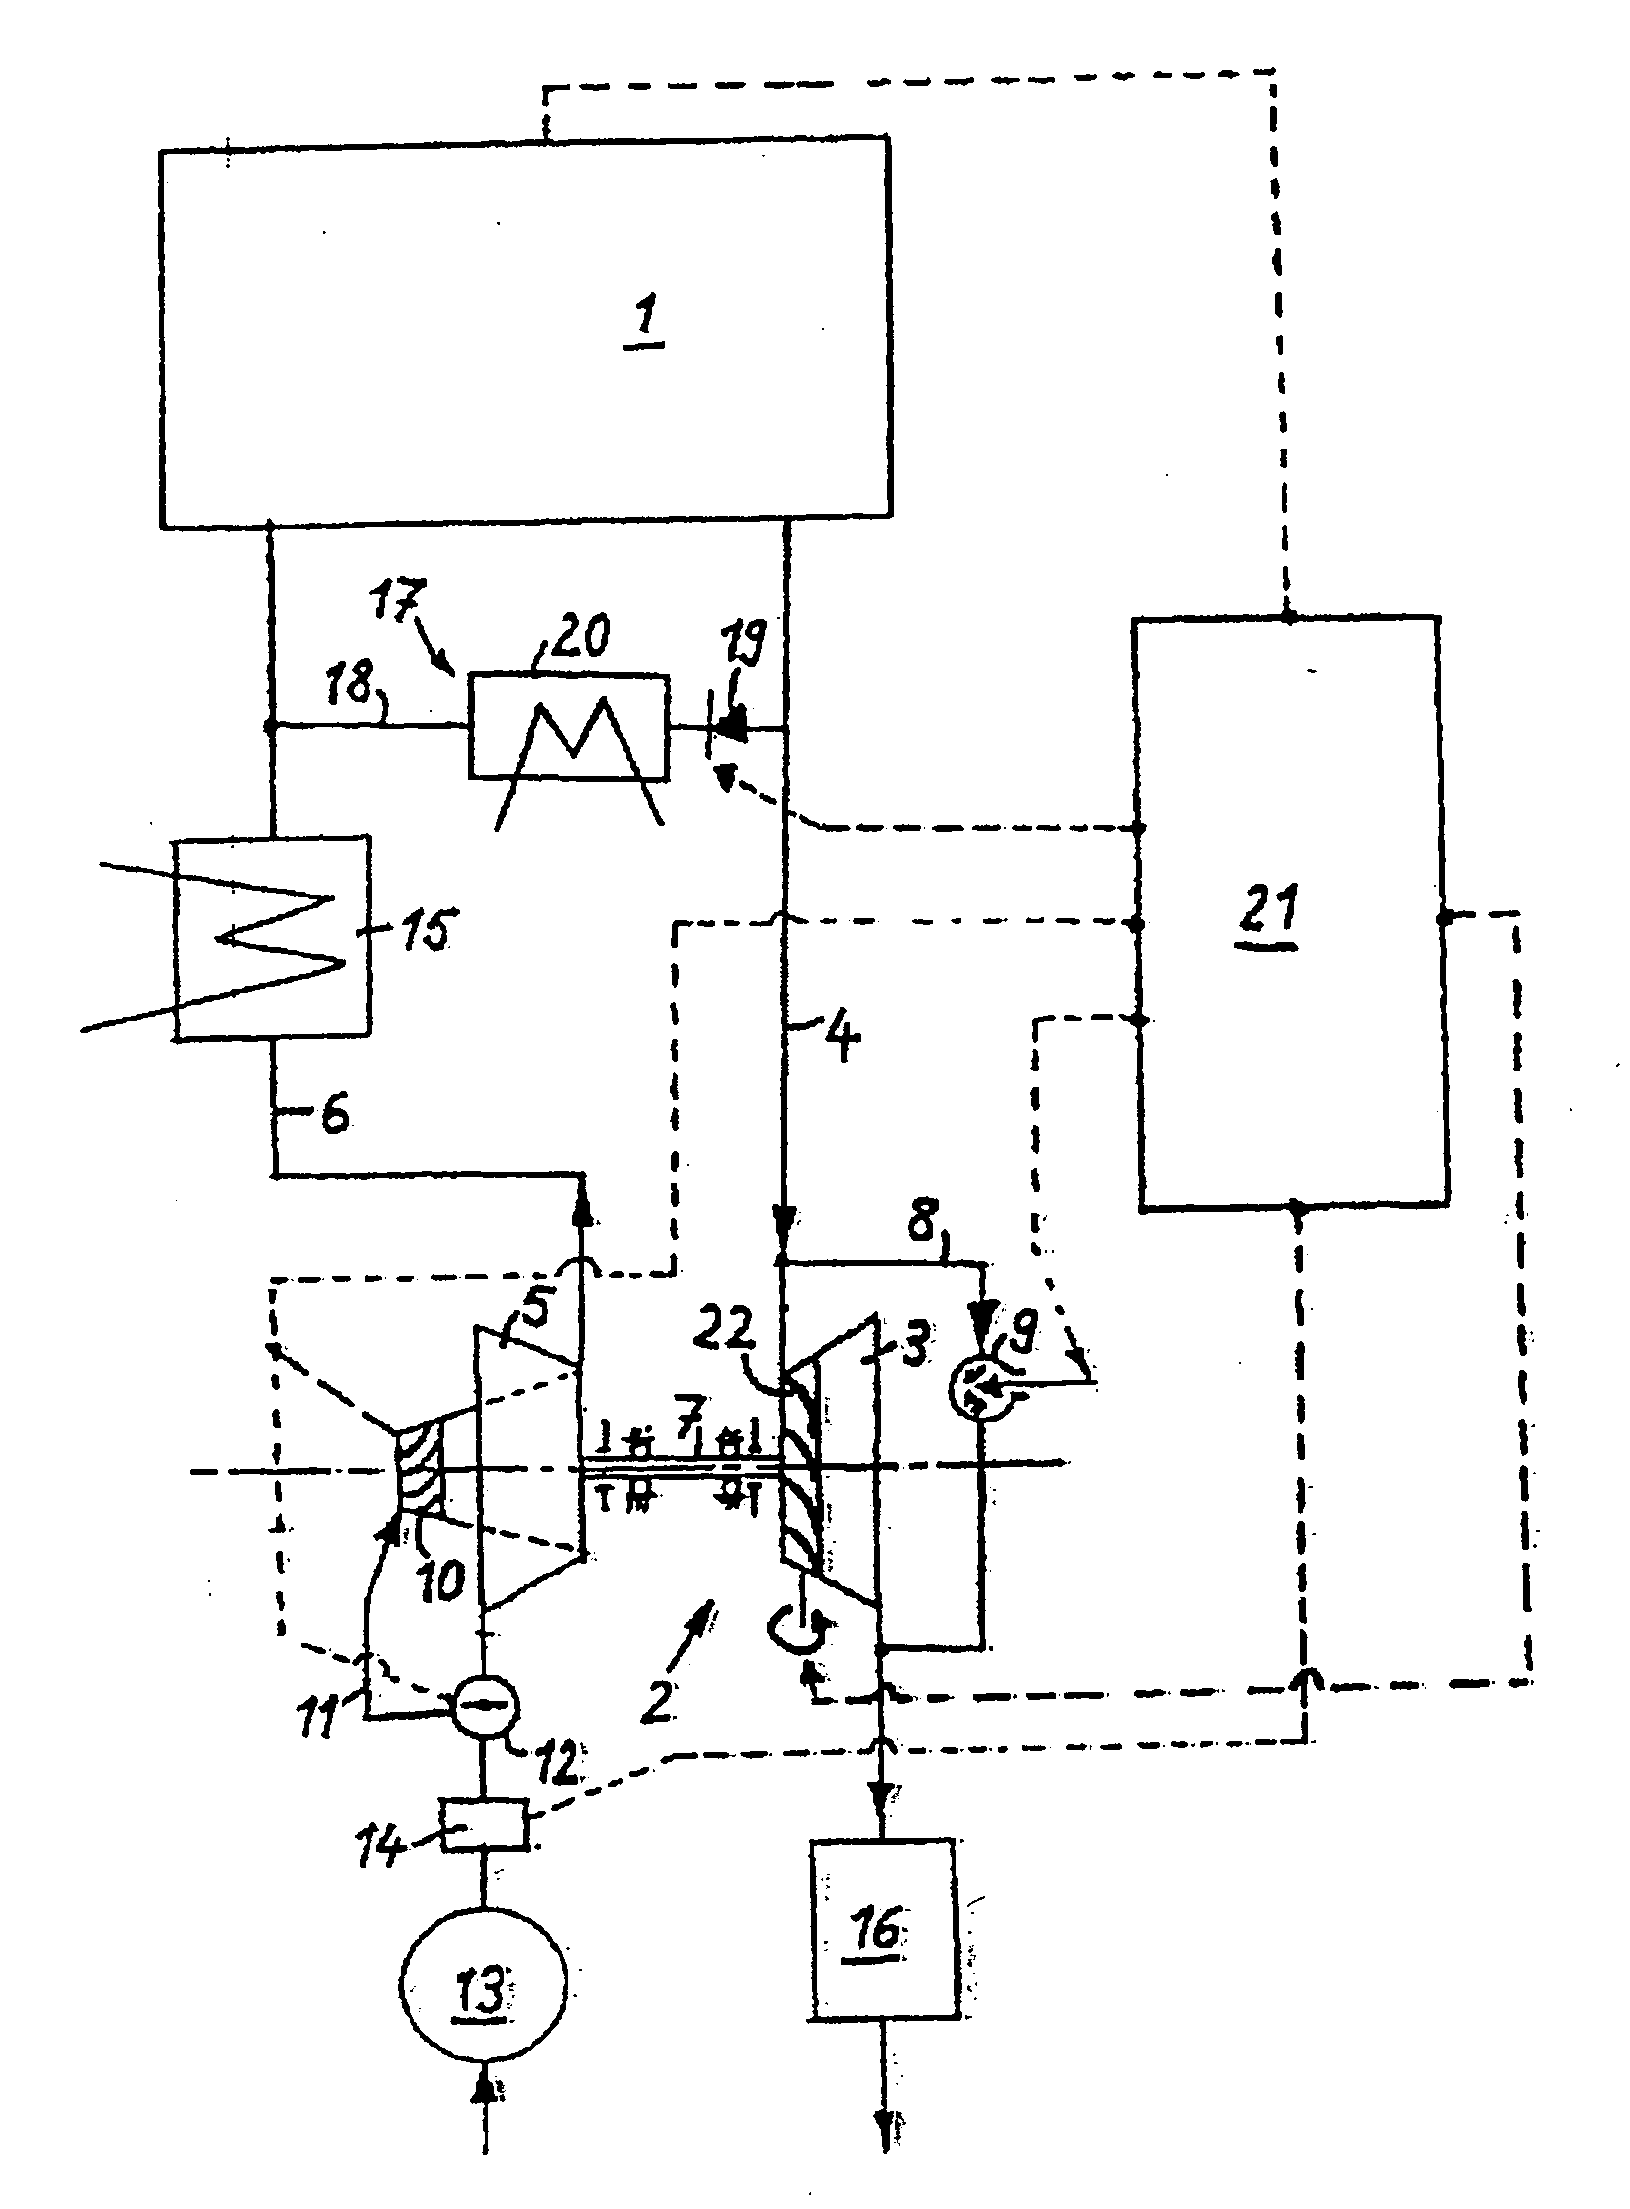 Method for operating a supercharged internal combustion engine